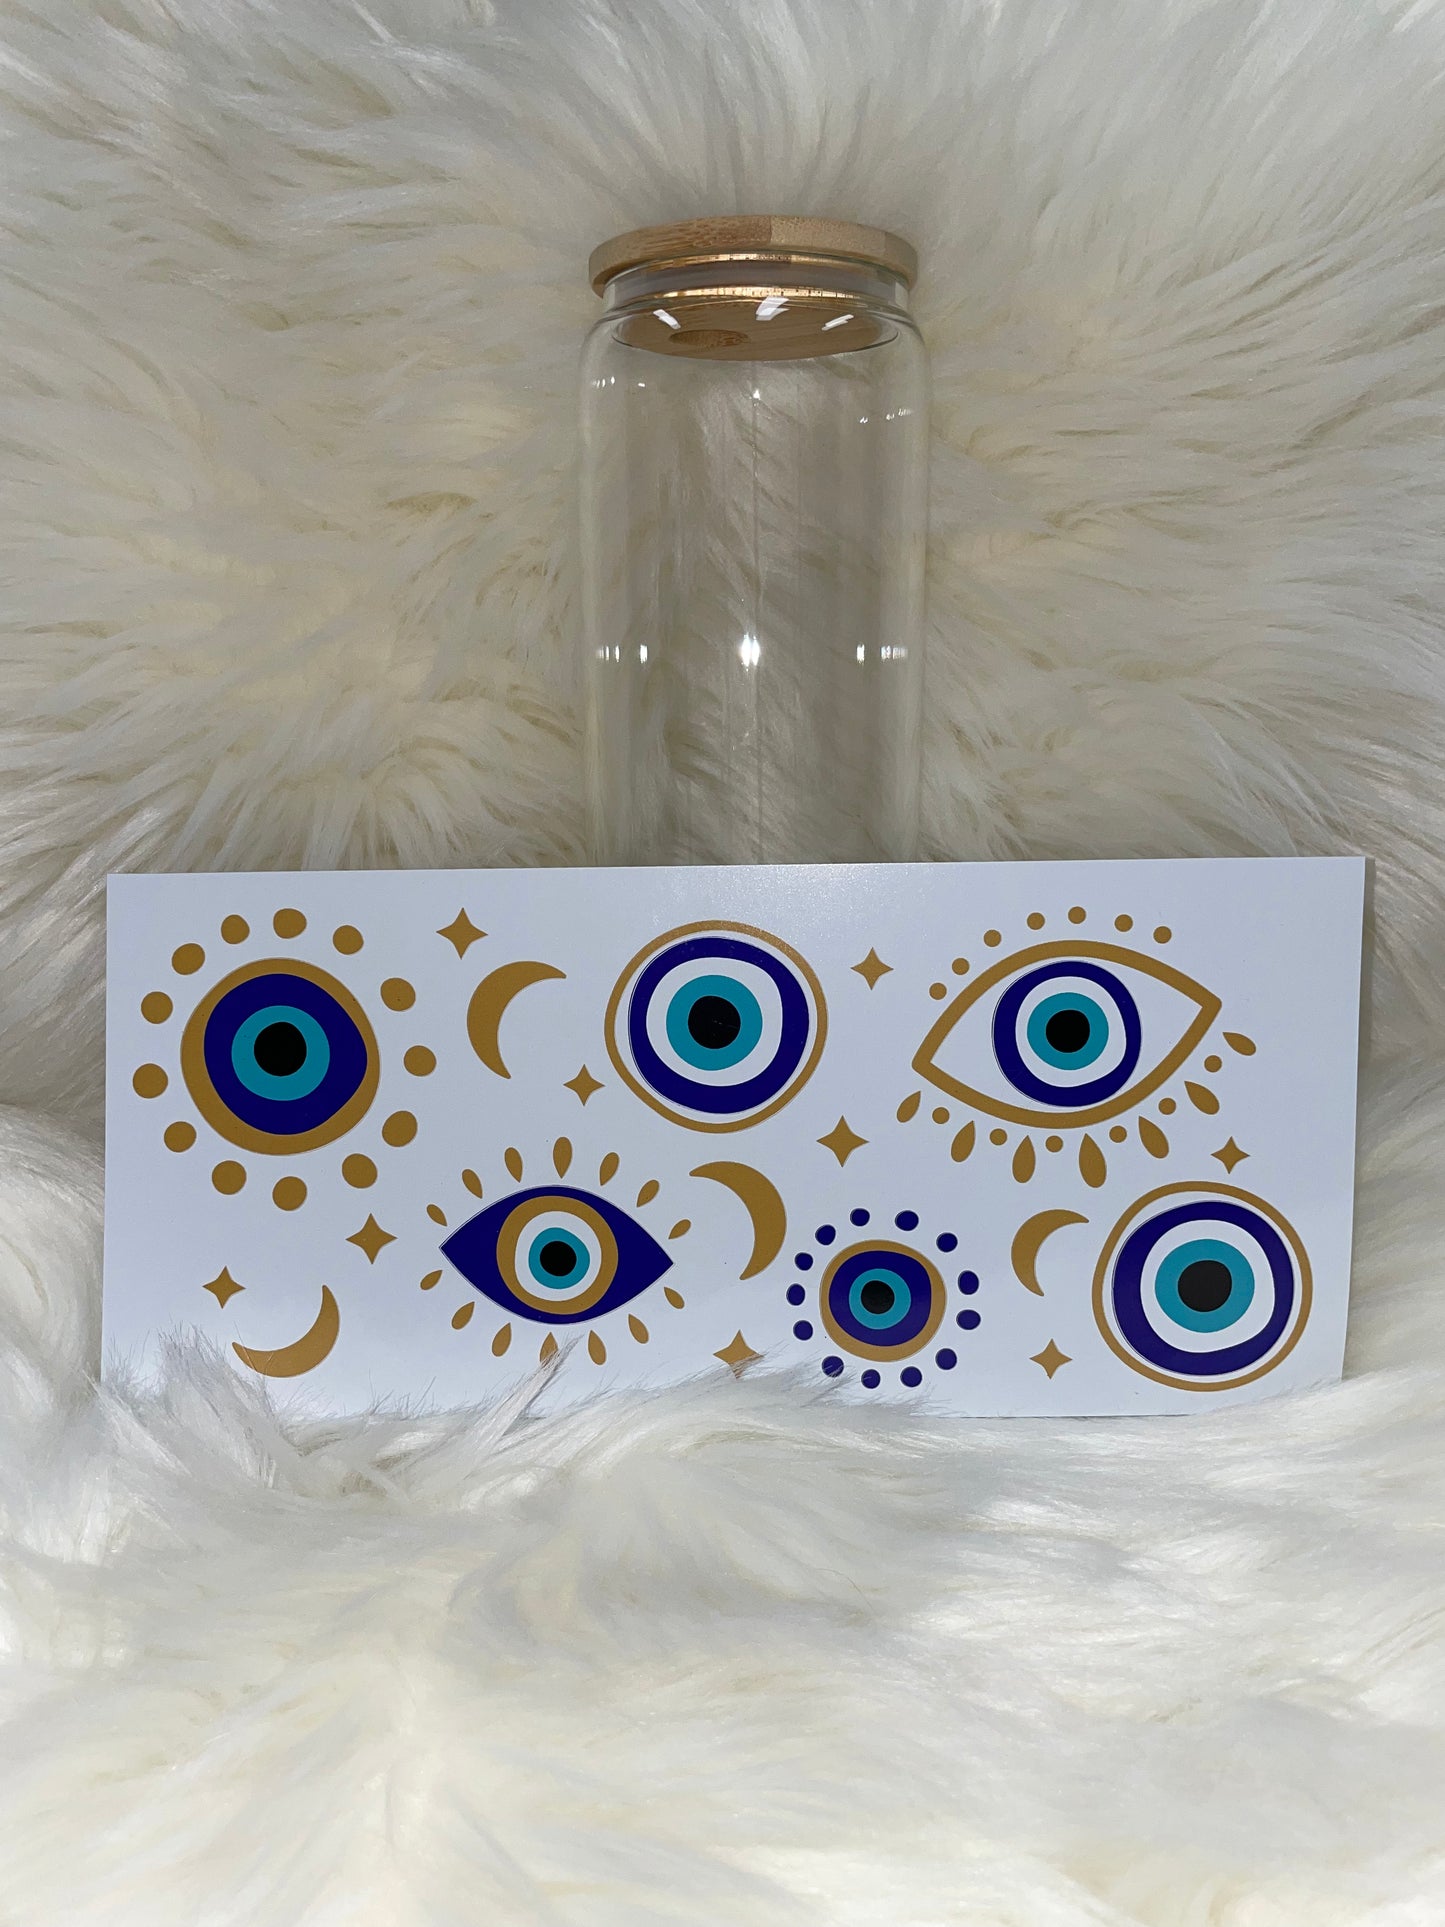 16oz Glass Libby Cup *All seeing eye*